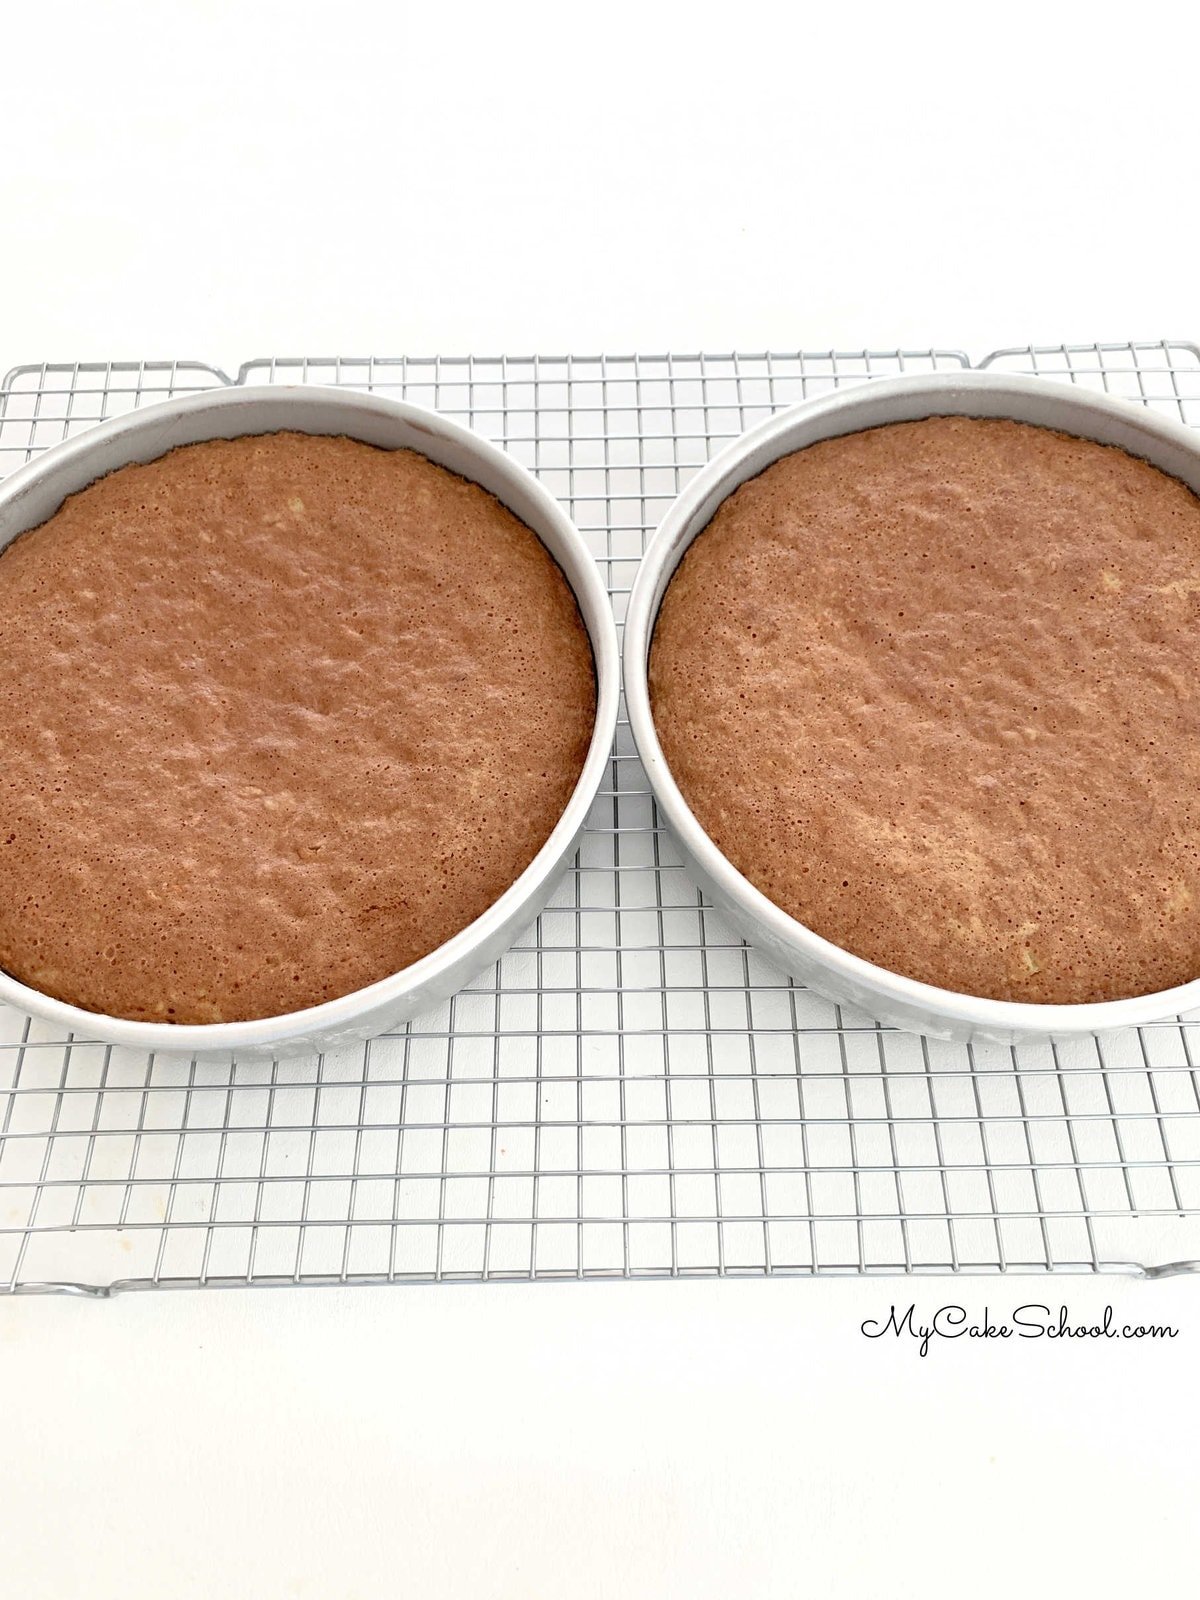 Two carrot cake layers, in pans, cooling on wire rack